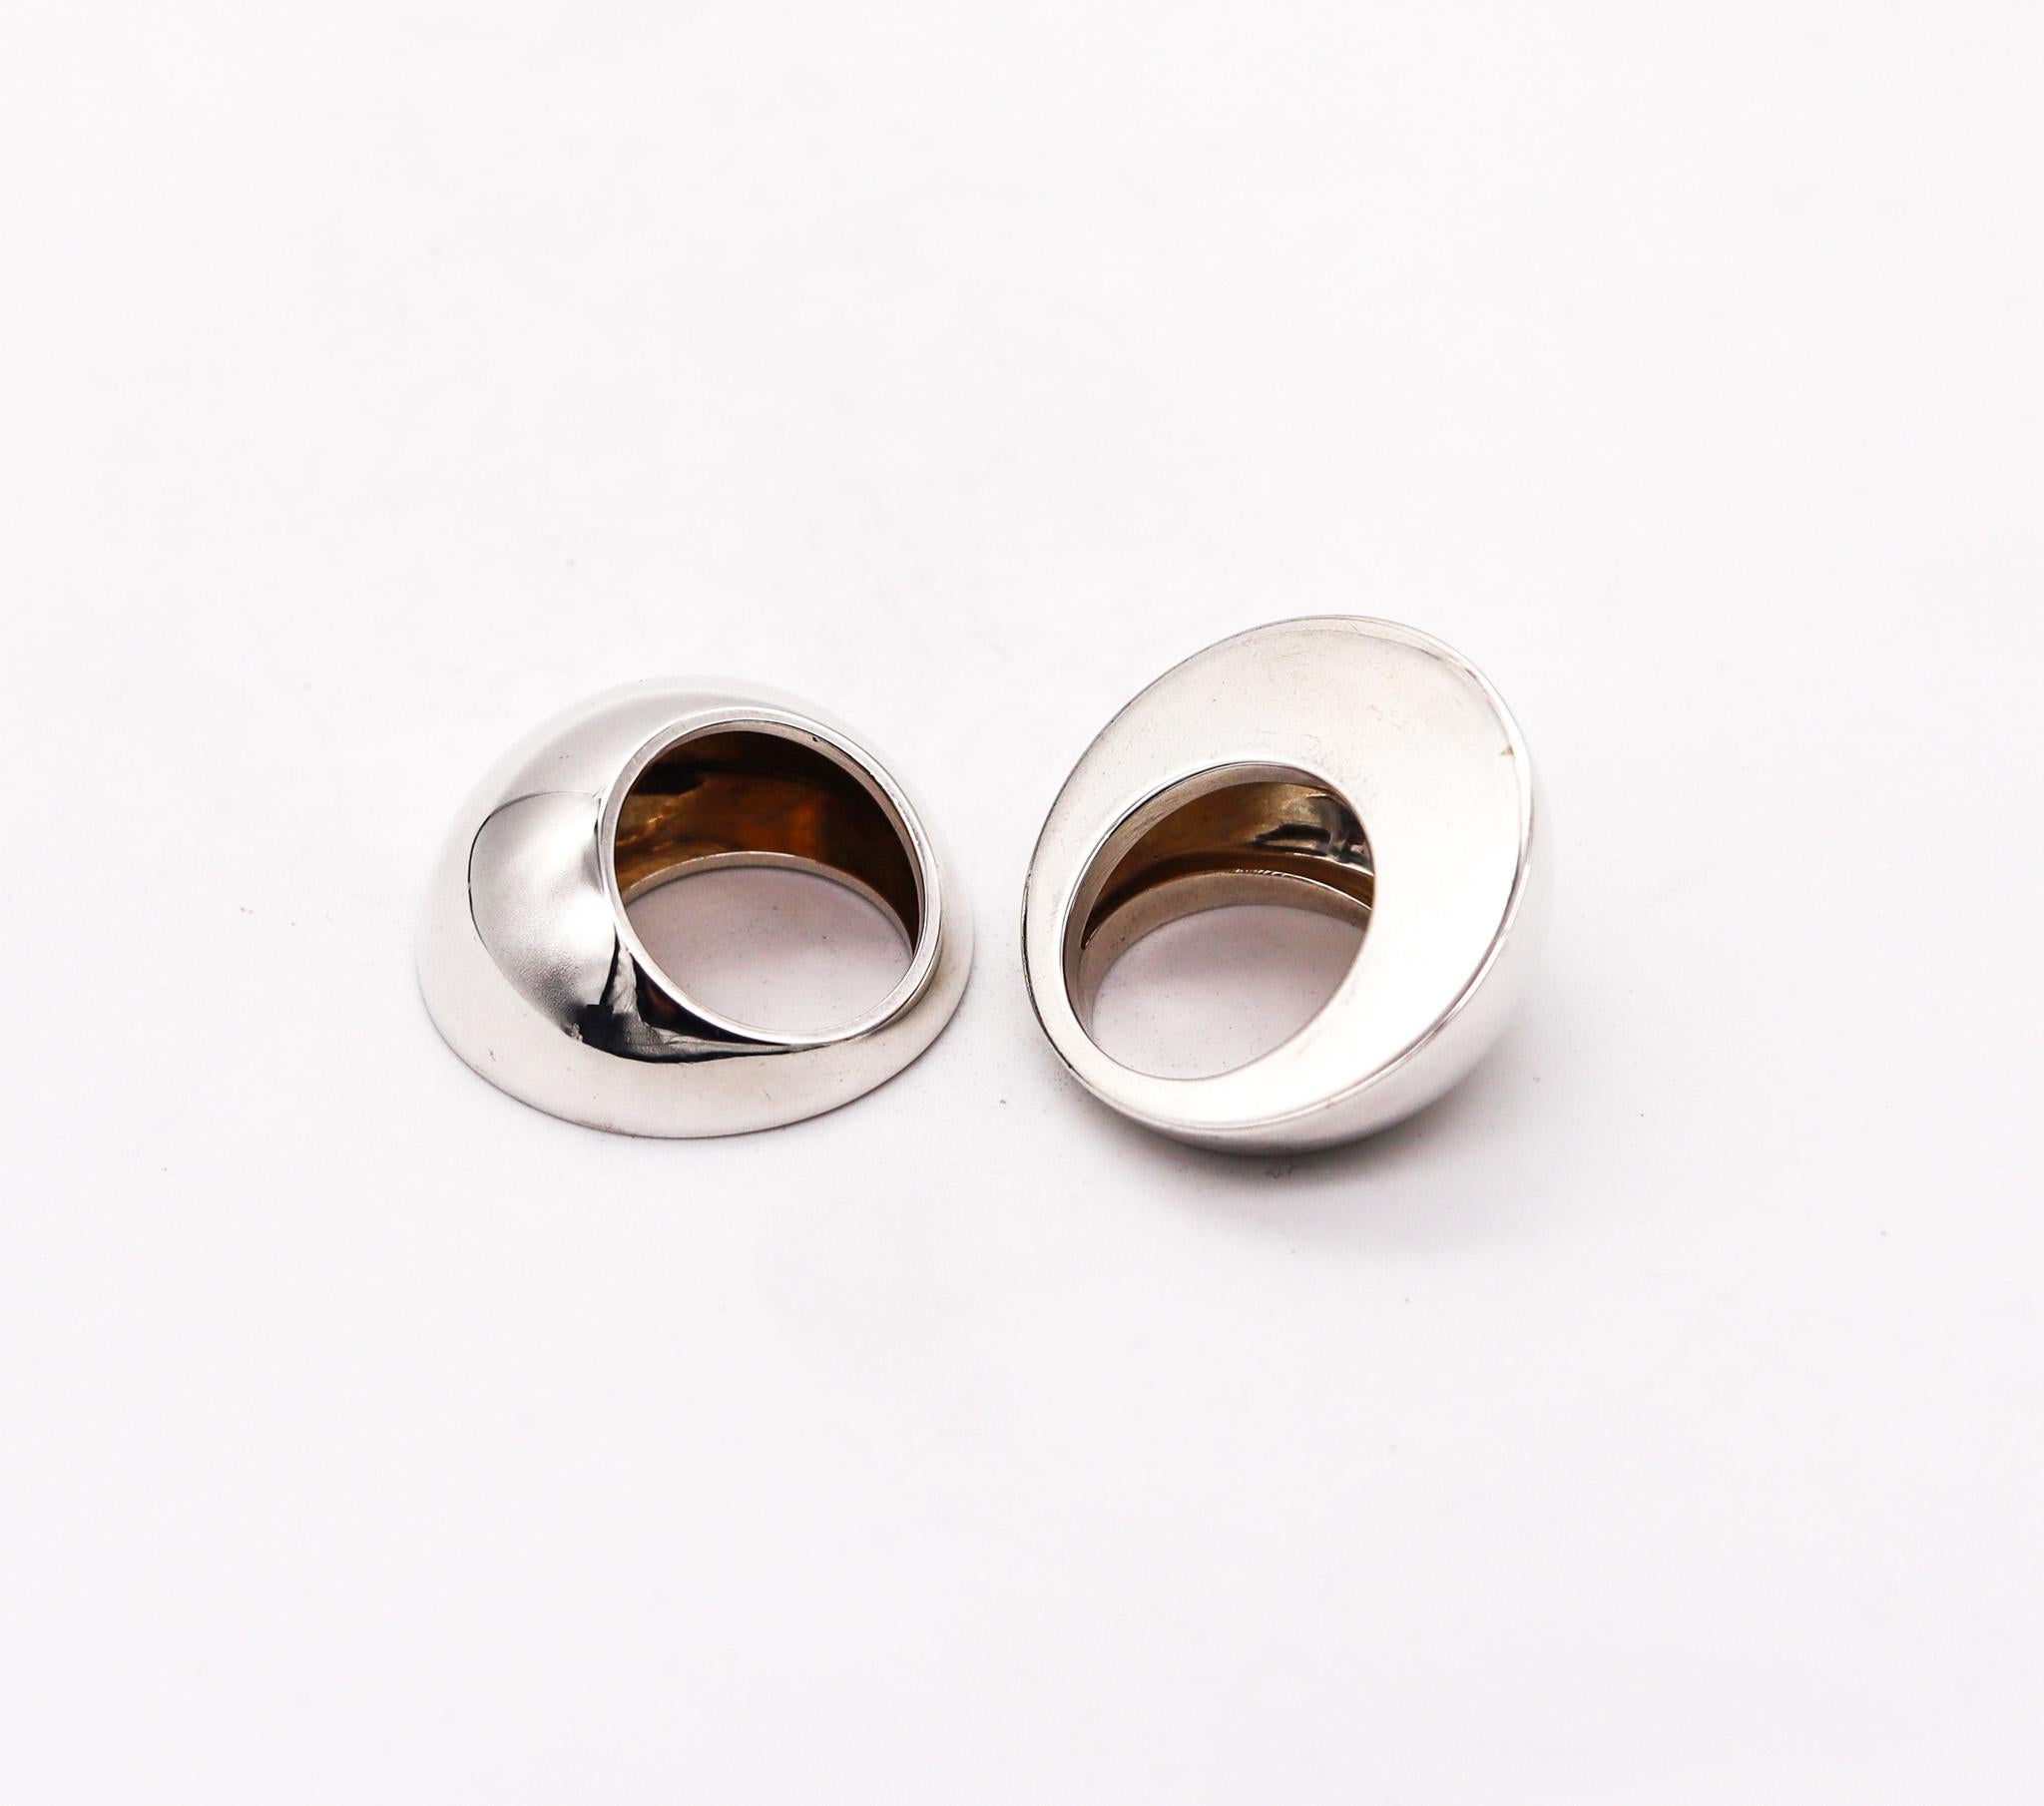 Pair of geometric stackable rings designed by Monica Coscioni. 

Beautiful and sleek contemporary pair of ultra modern rings, created in the city of Orvieto Italy at the jewelry atelier of the designer Monica Coscioni. This modern geometric pair of